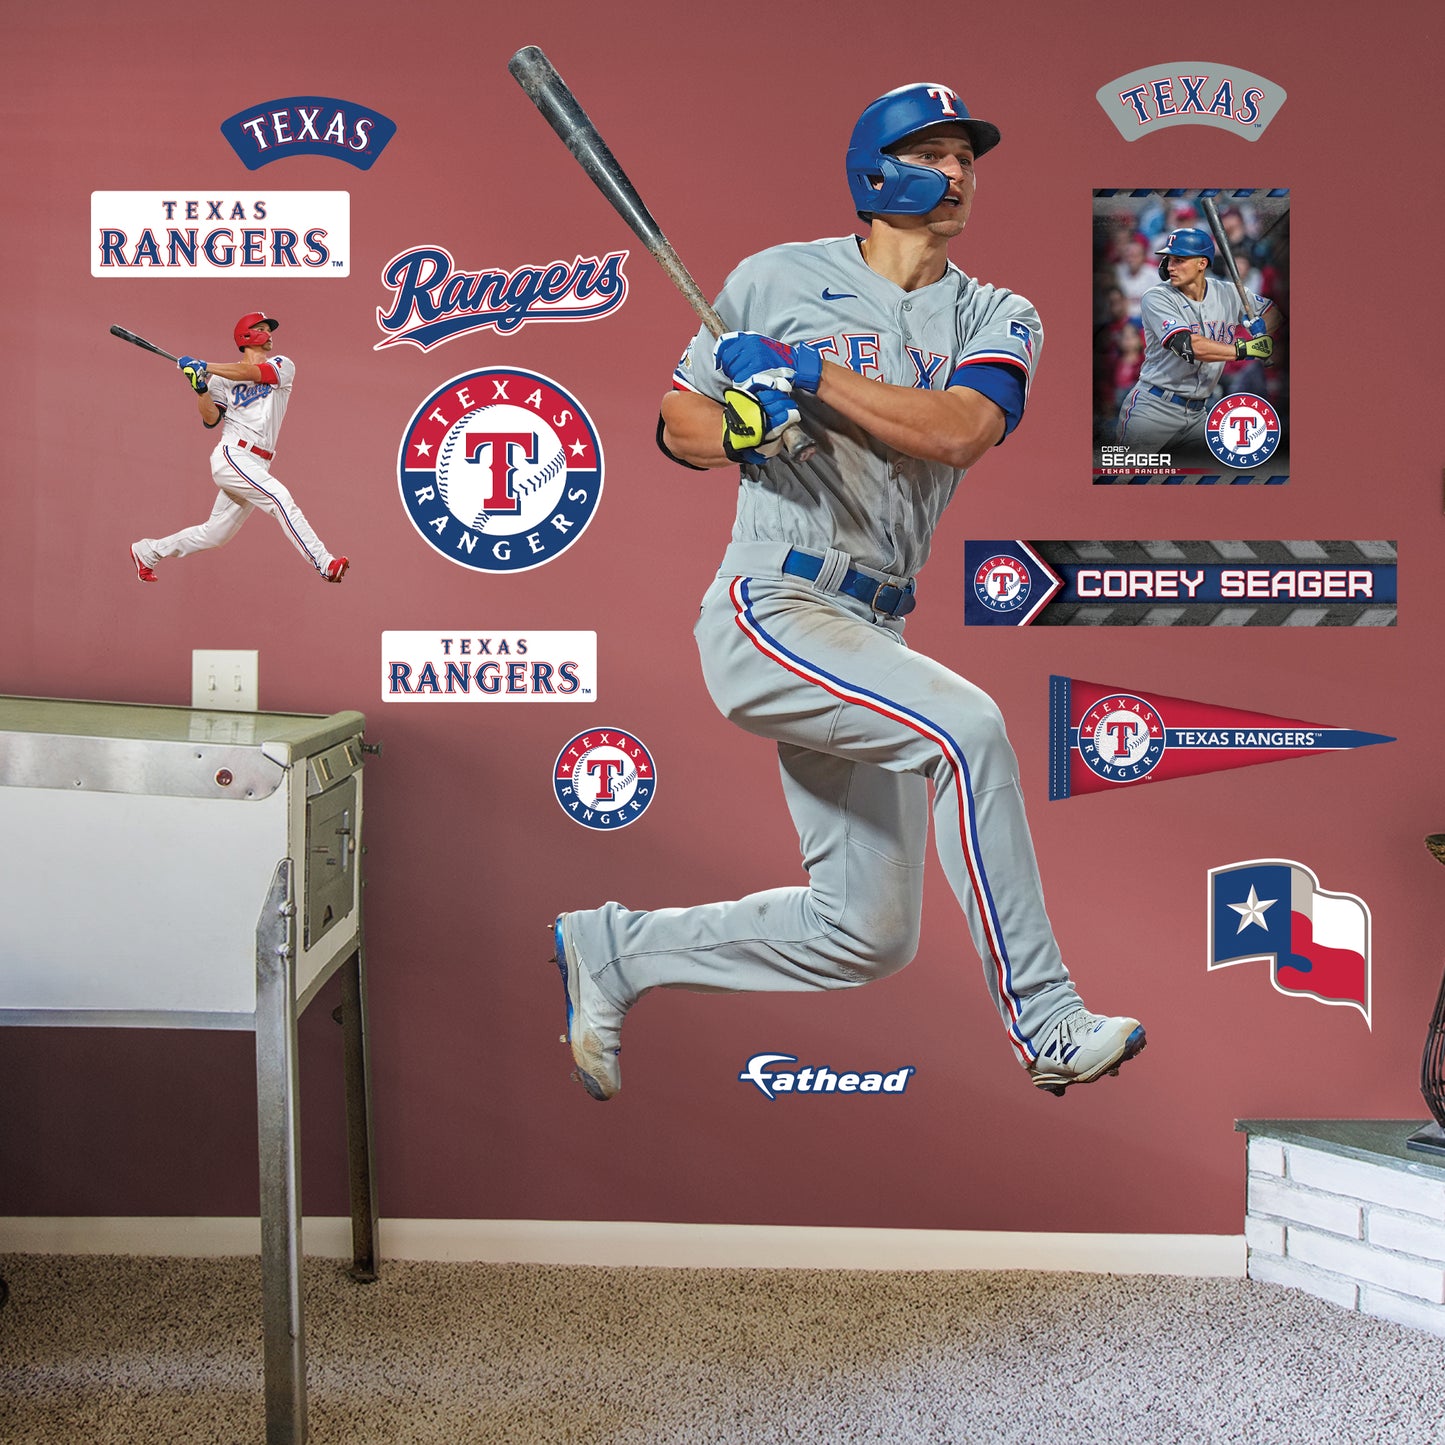 Texas Rangers: Corey Seager 2022        - Officially Licensed MLB Removable     Adhesive Decal